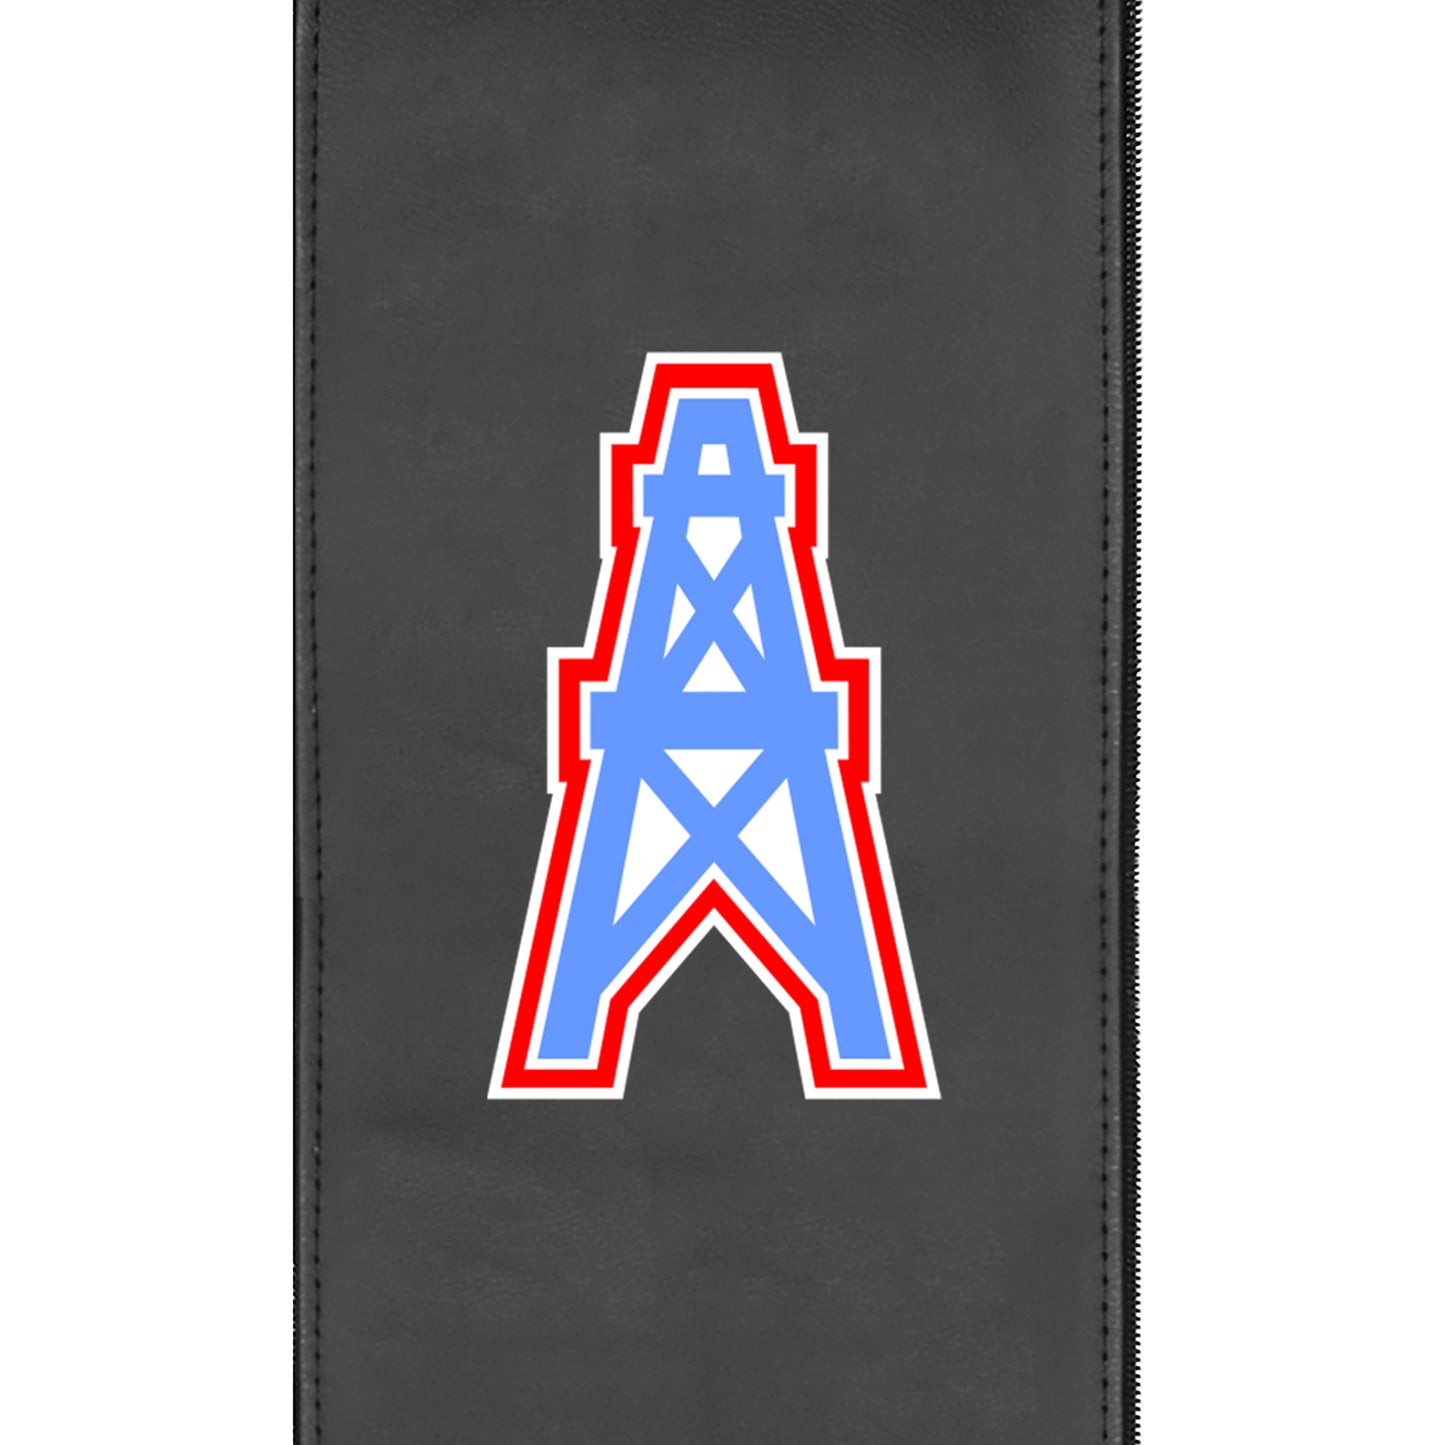 Game Rocker 100 with Houston Oilers Classic Logo